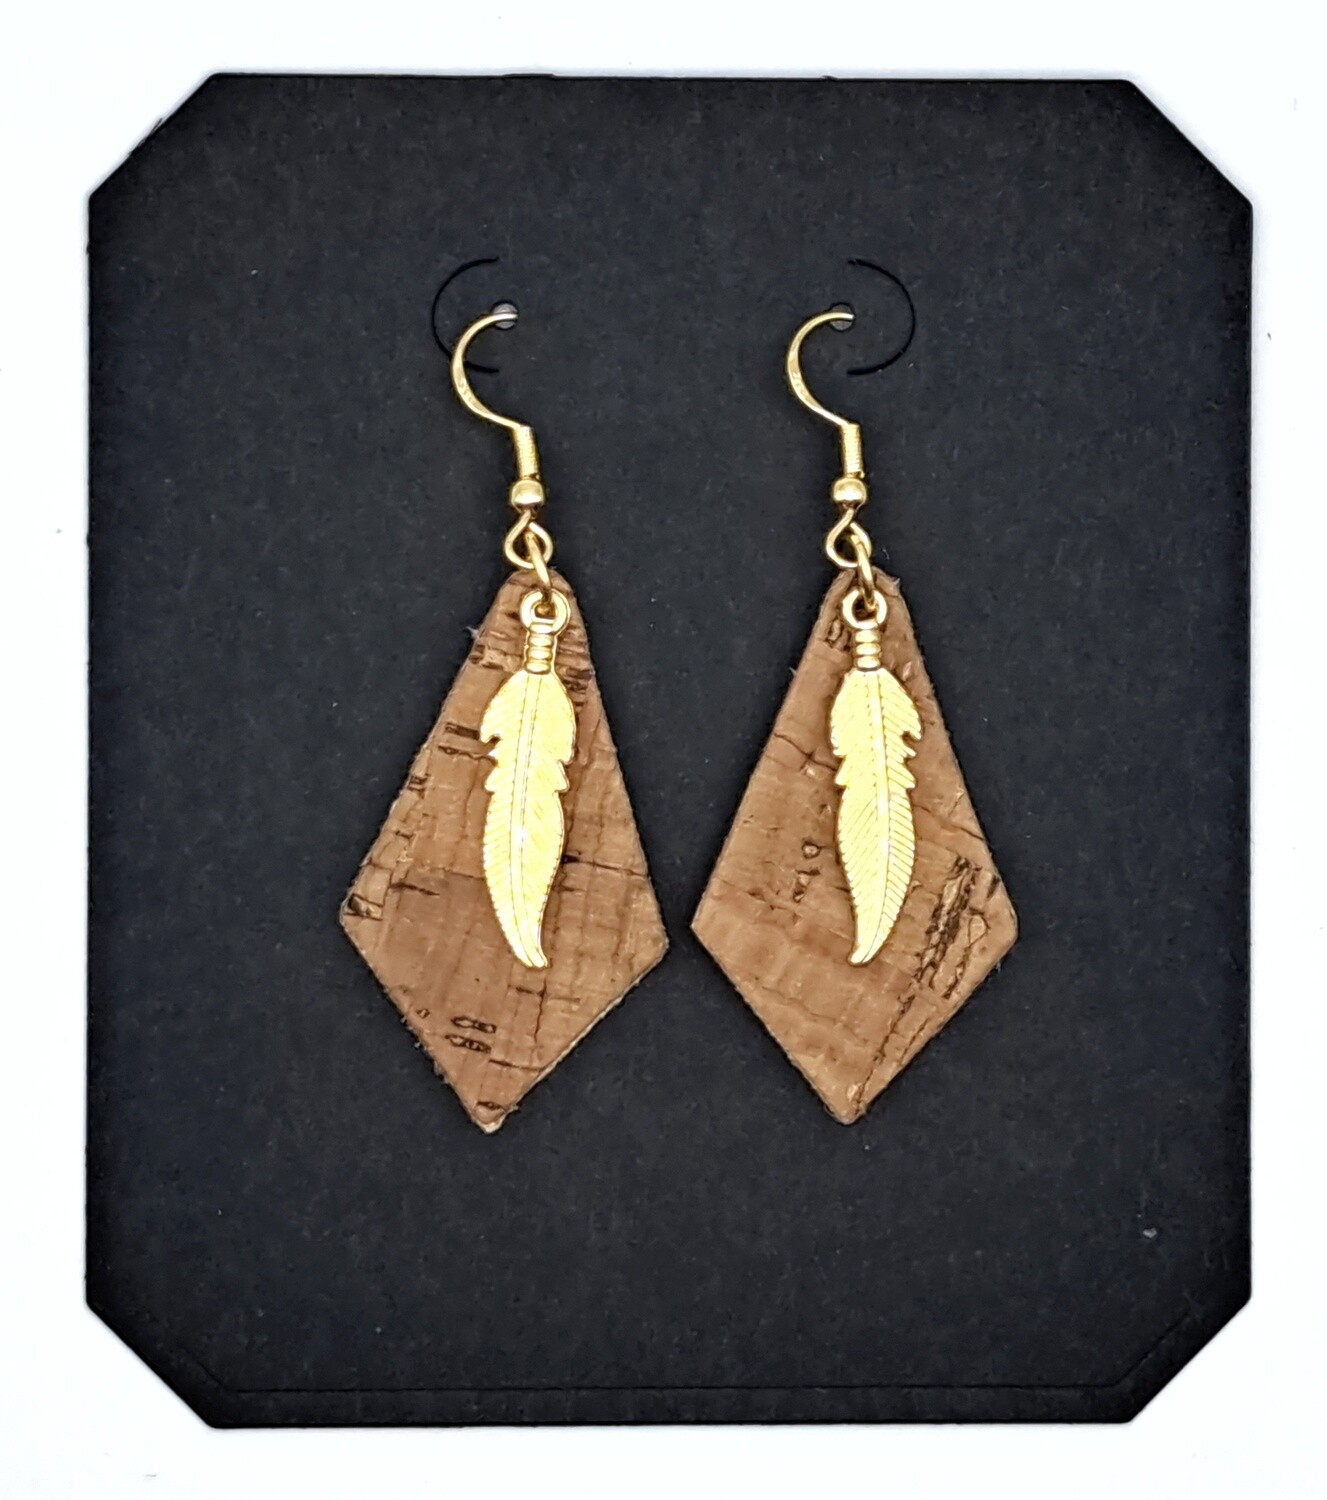 Handmade Faux Leather with Feather Charm Earrings